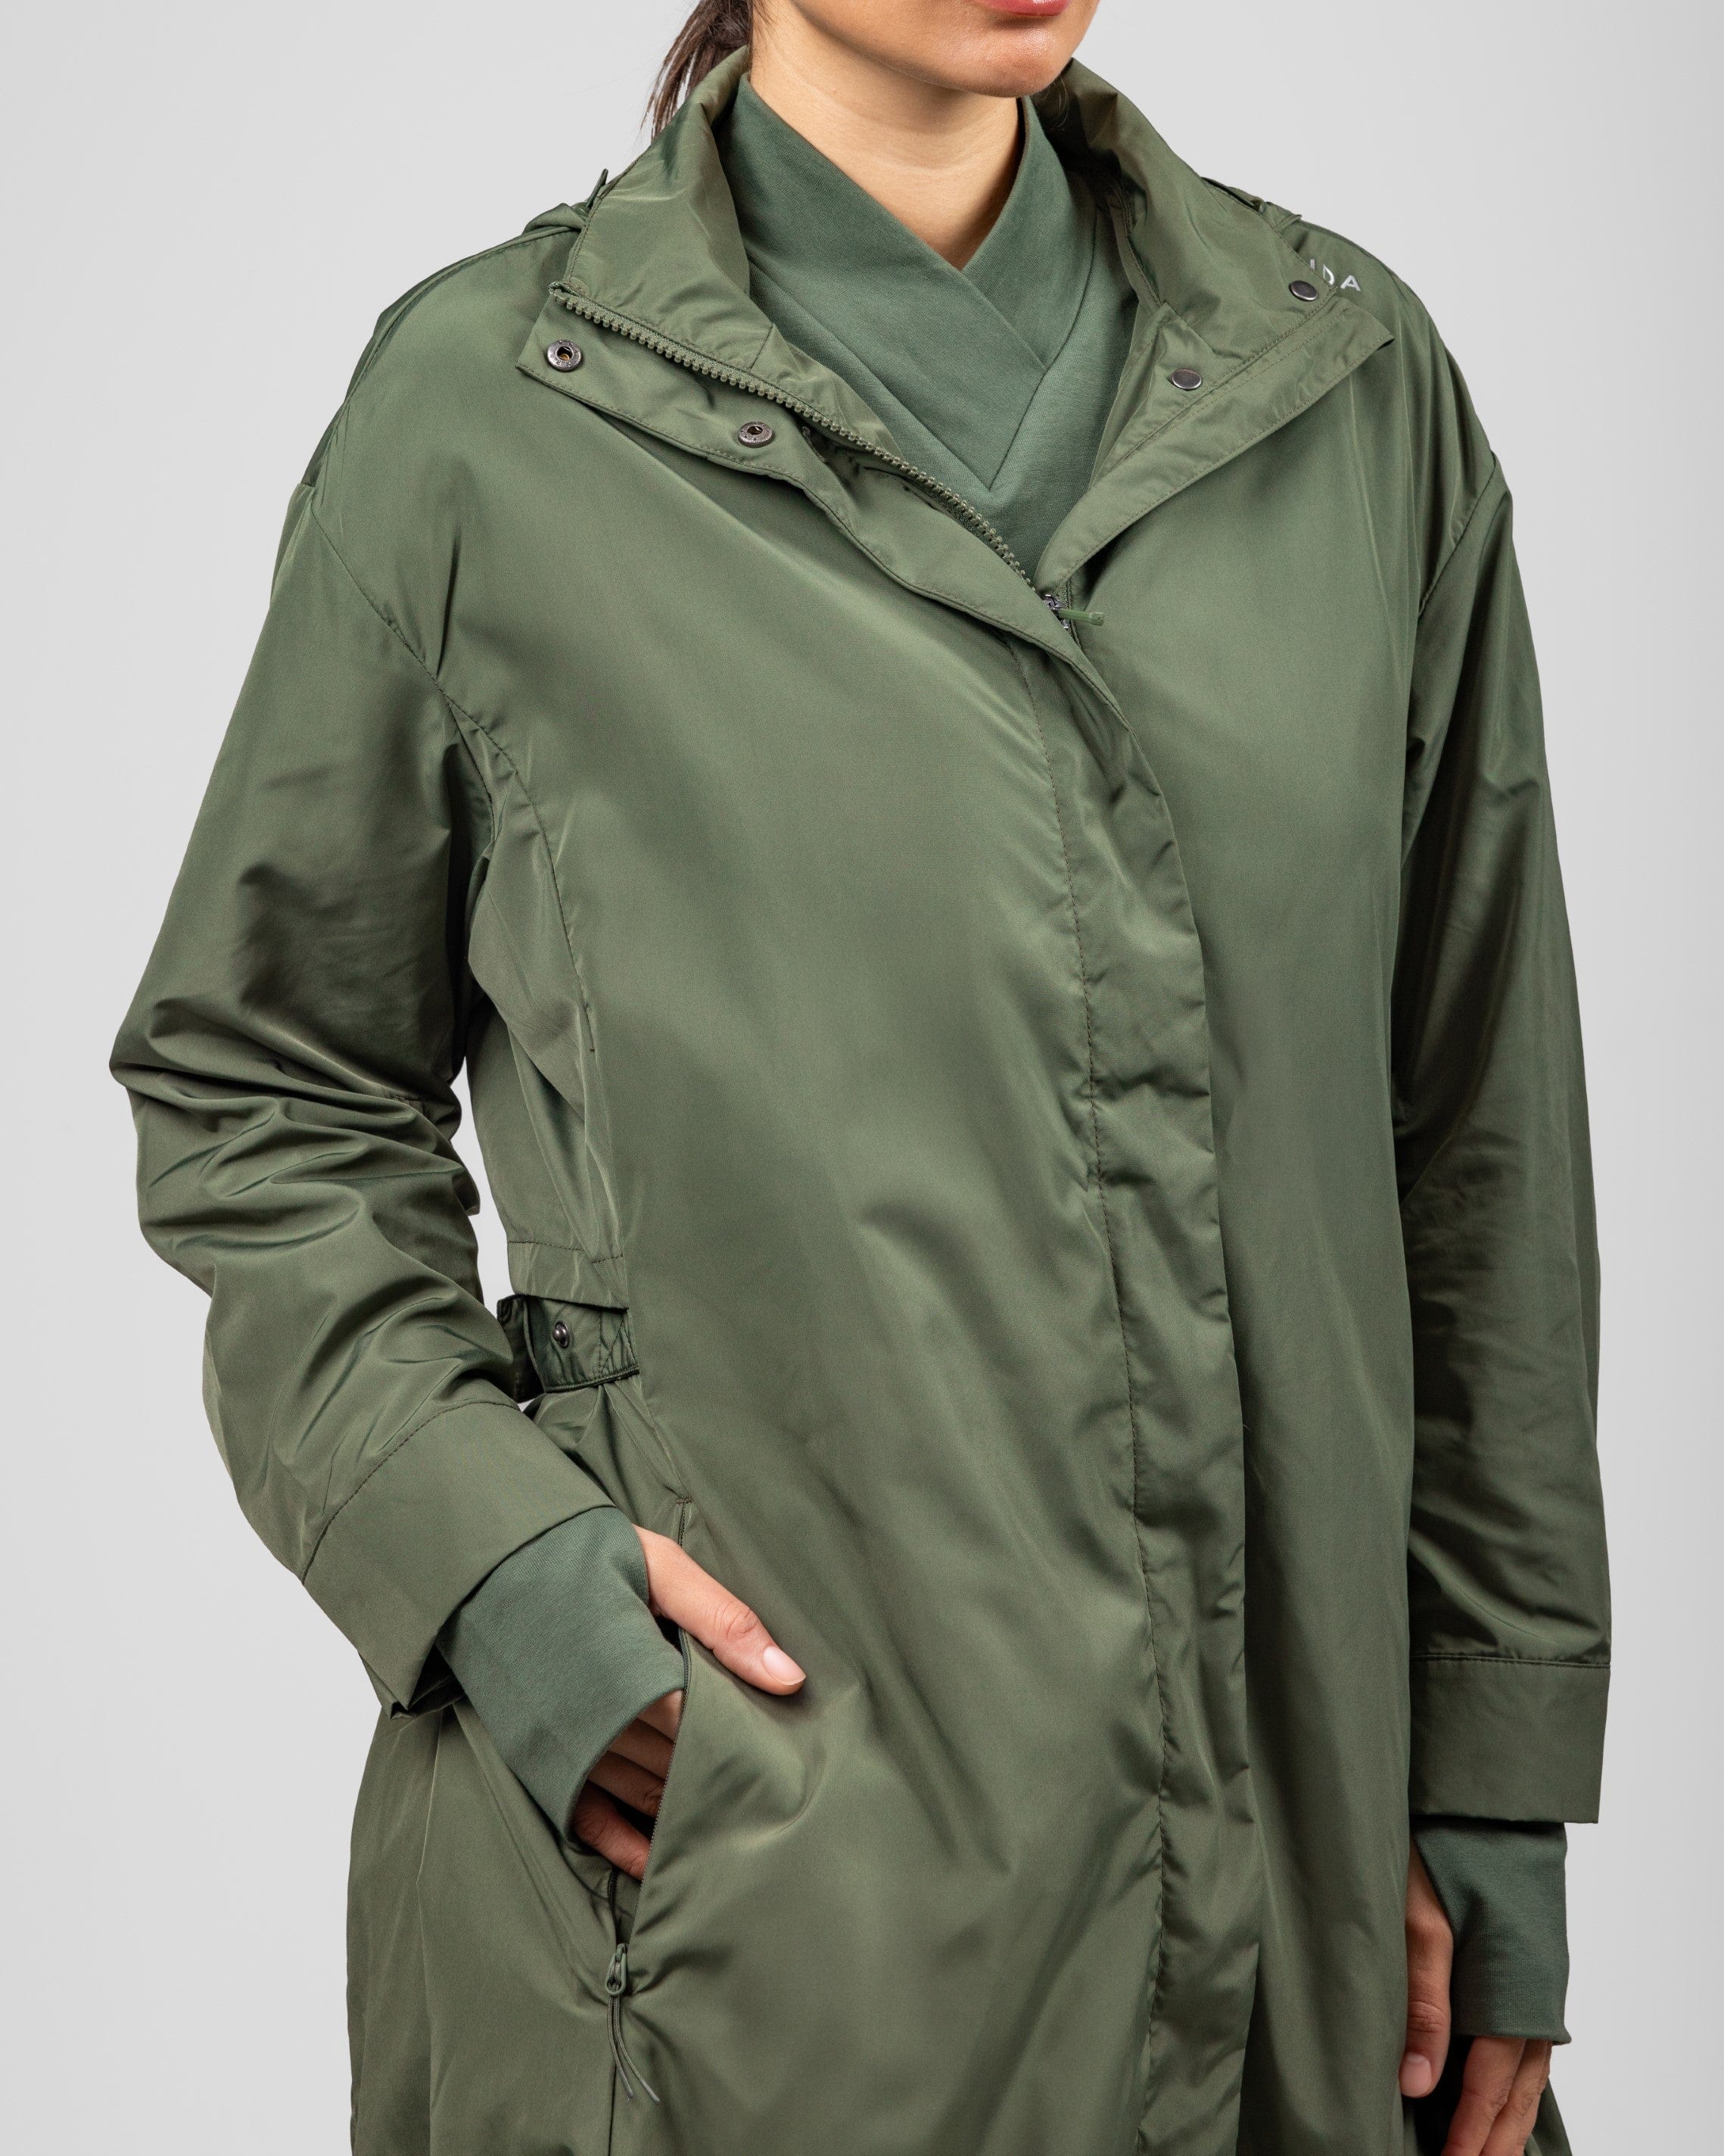 A woman models a Modest MAK LIGHT PARKA by Qynda featuring lightweight fabric, with her hand casually tucked into the pocket. Only her torso is visible against a neutral background.